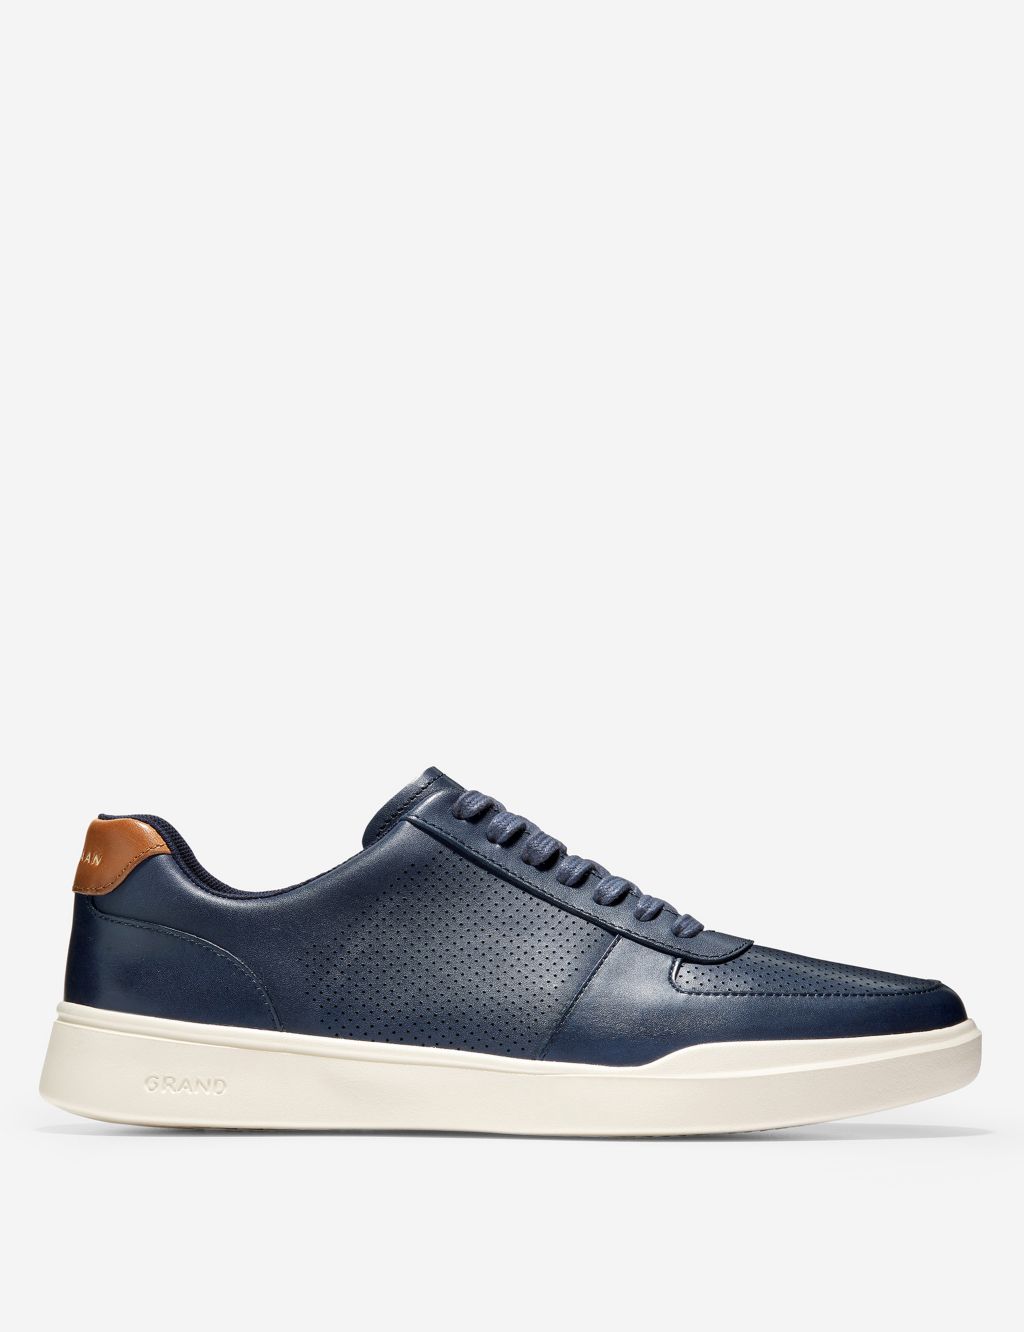 Grand Crosscourt Leather Lace Up Trainers image 1